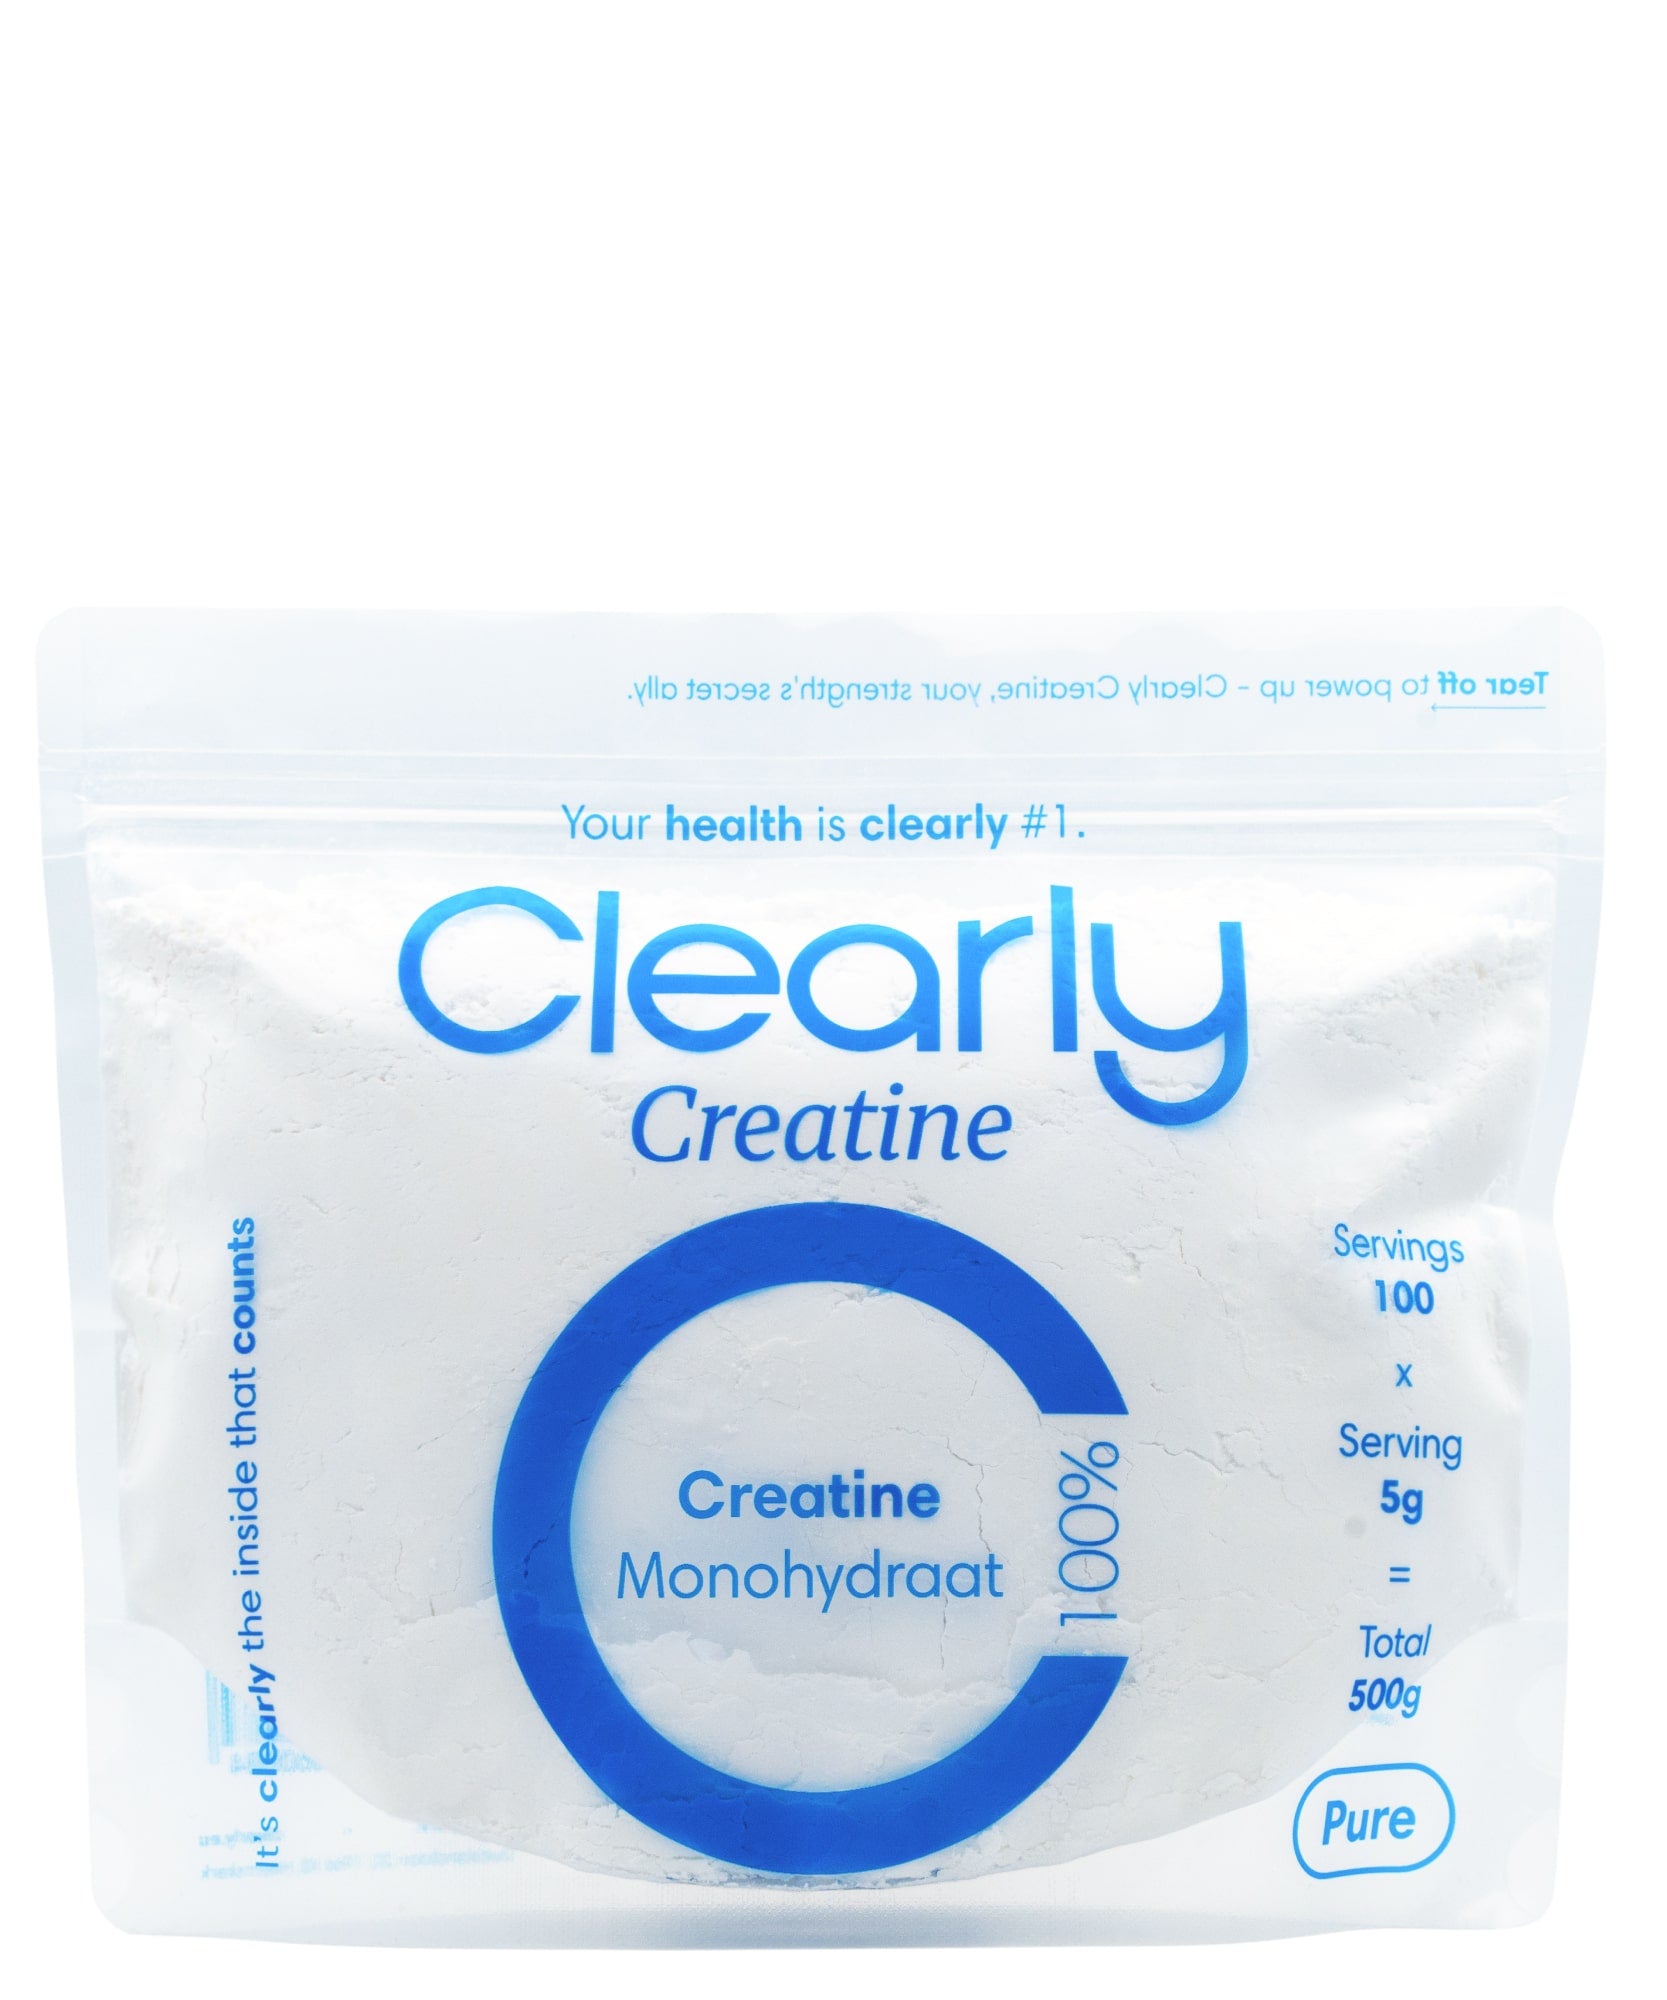 Clearly Creatine